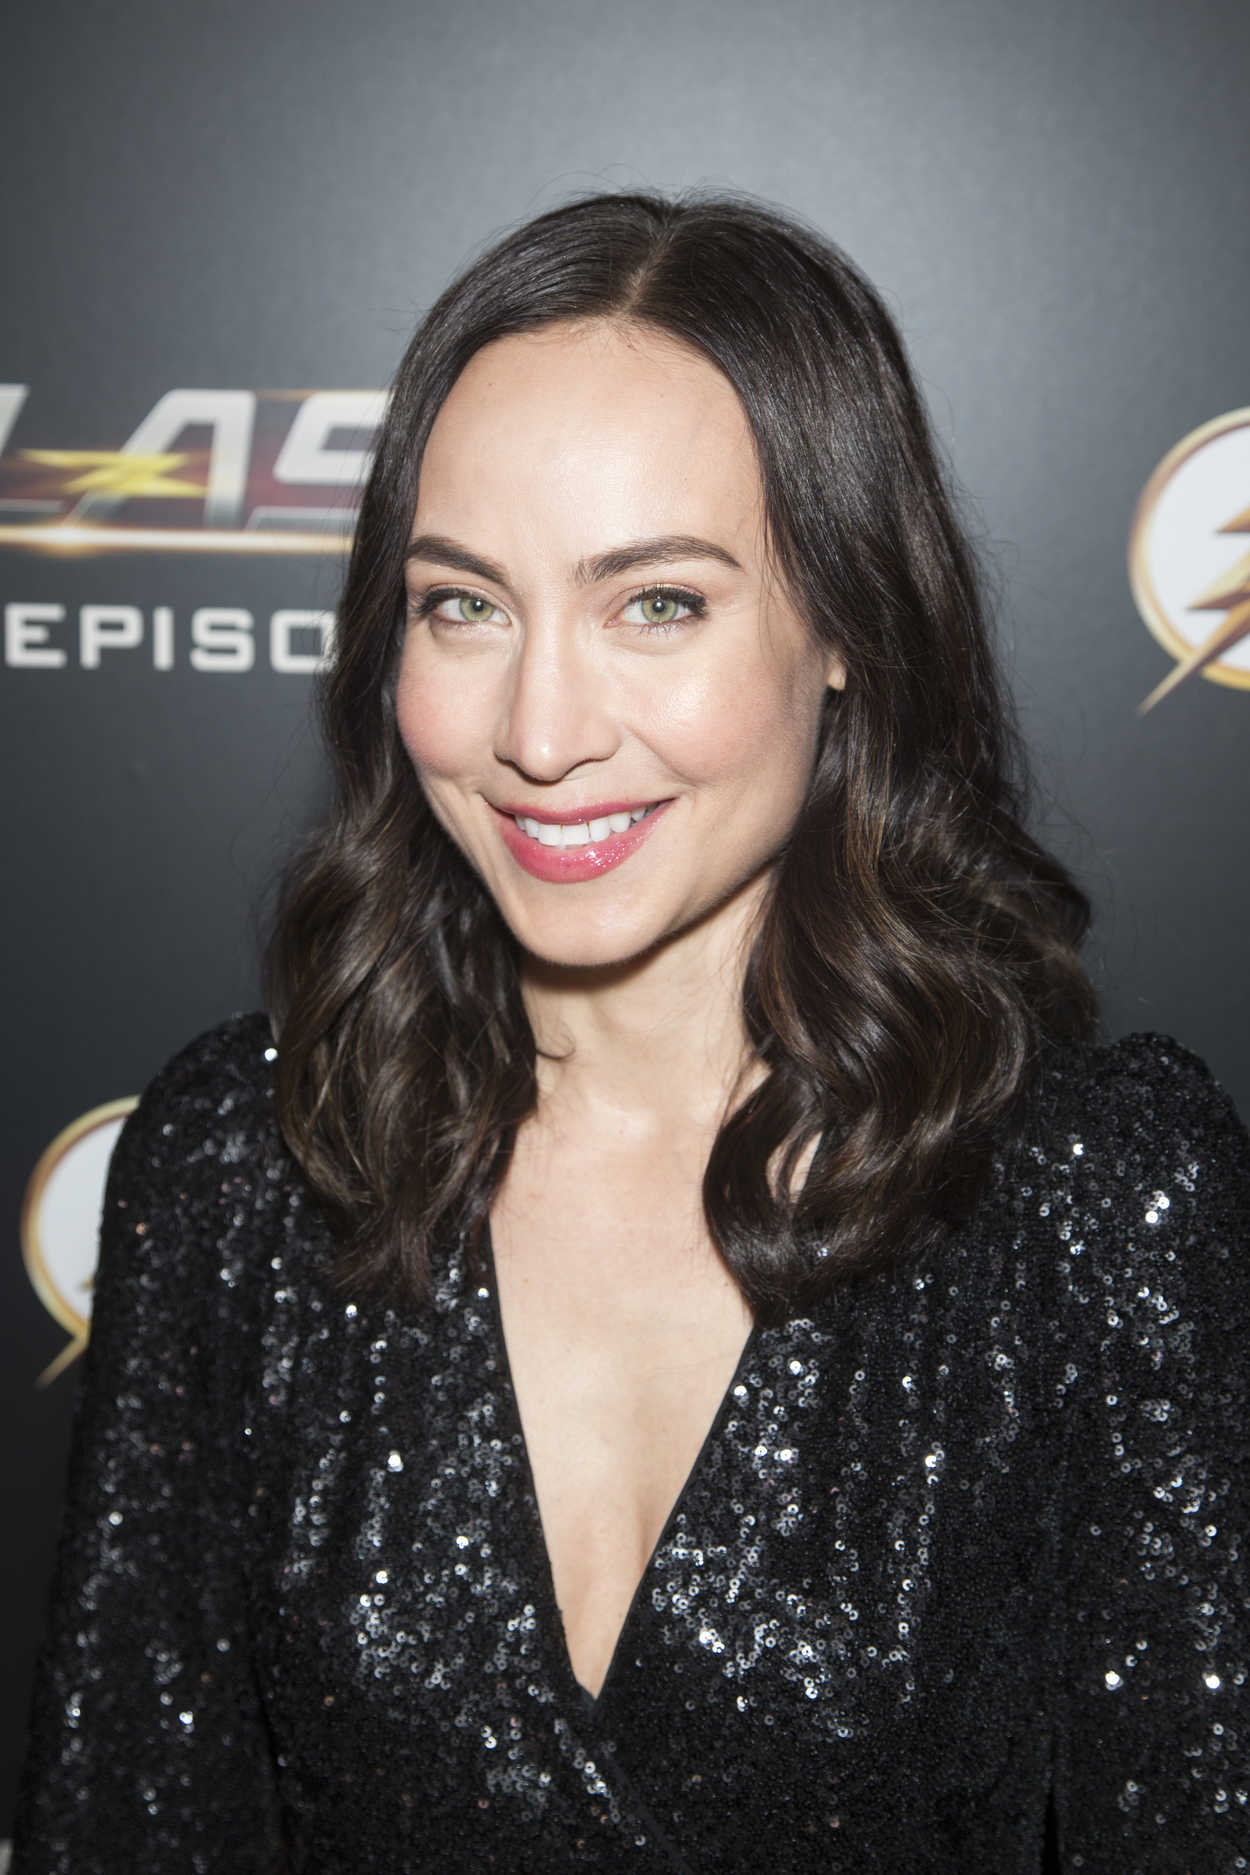 Courtney Ford Attends Celebration Of 100th Episode The Flash In LA 11.